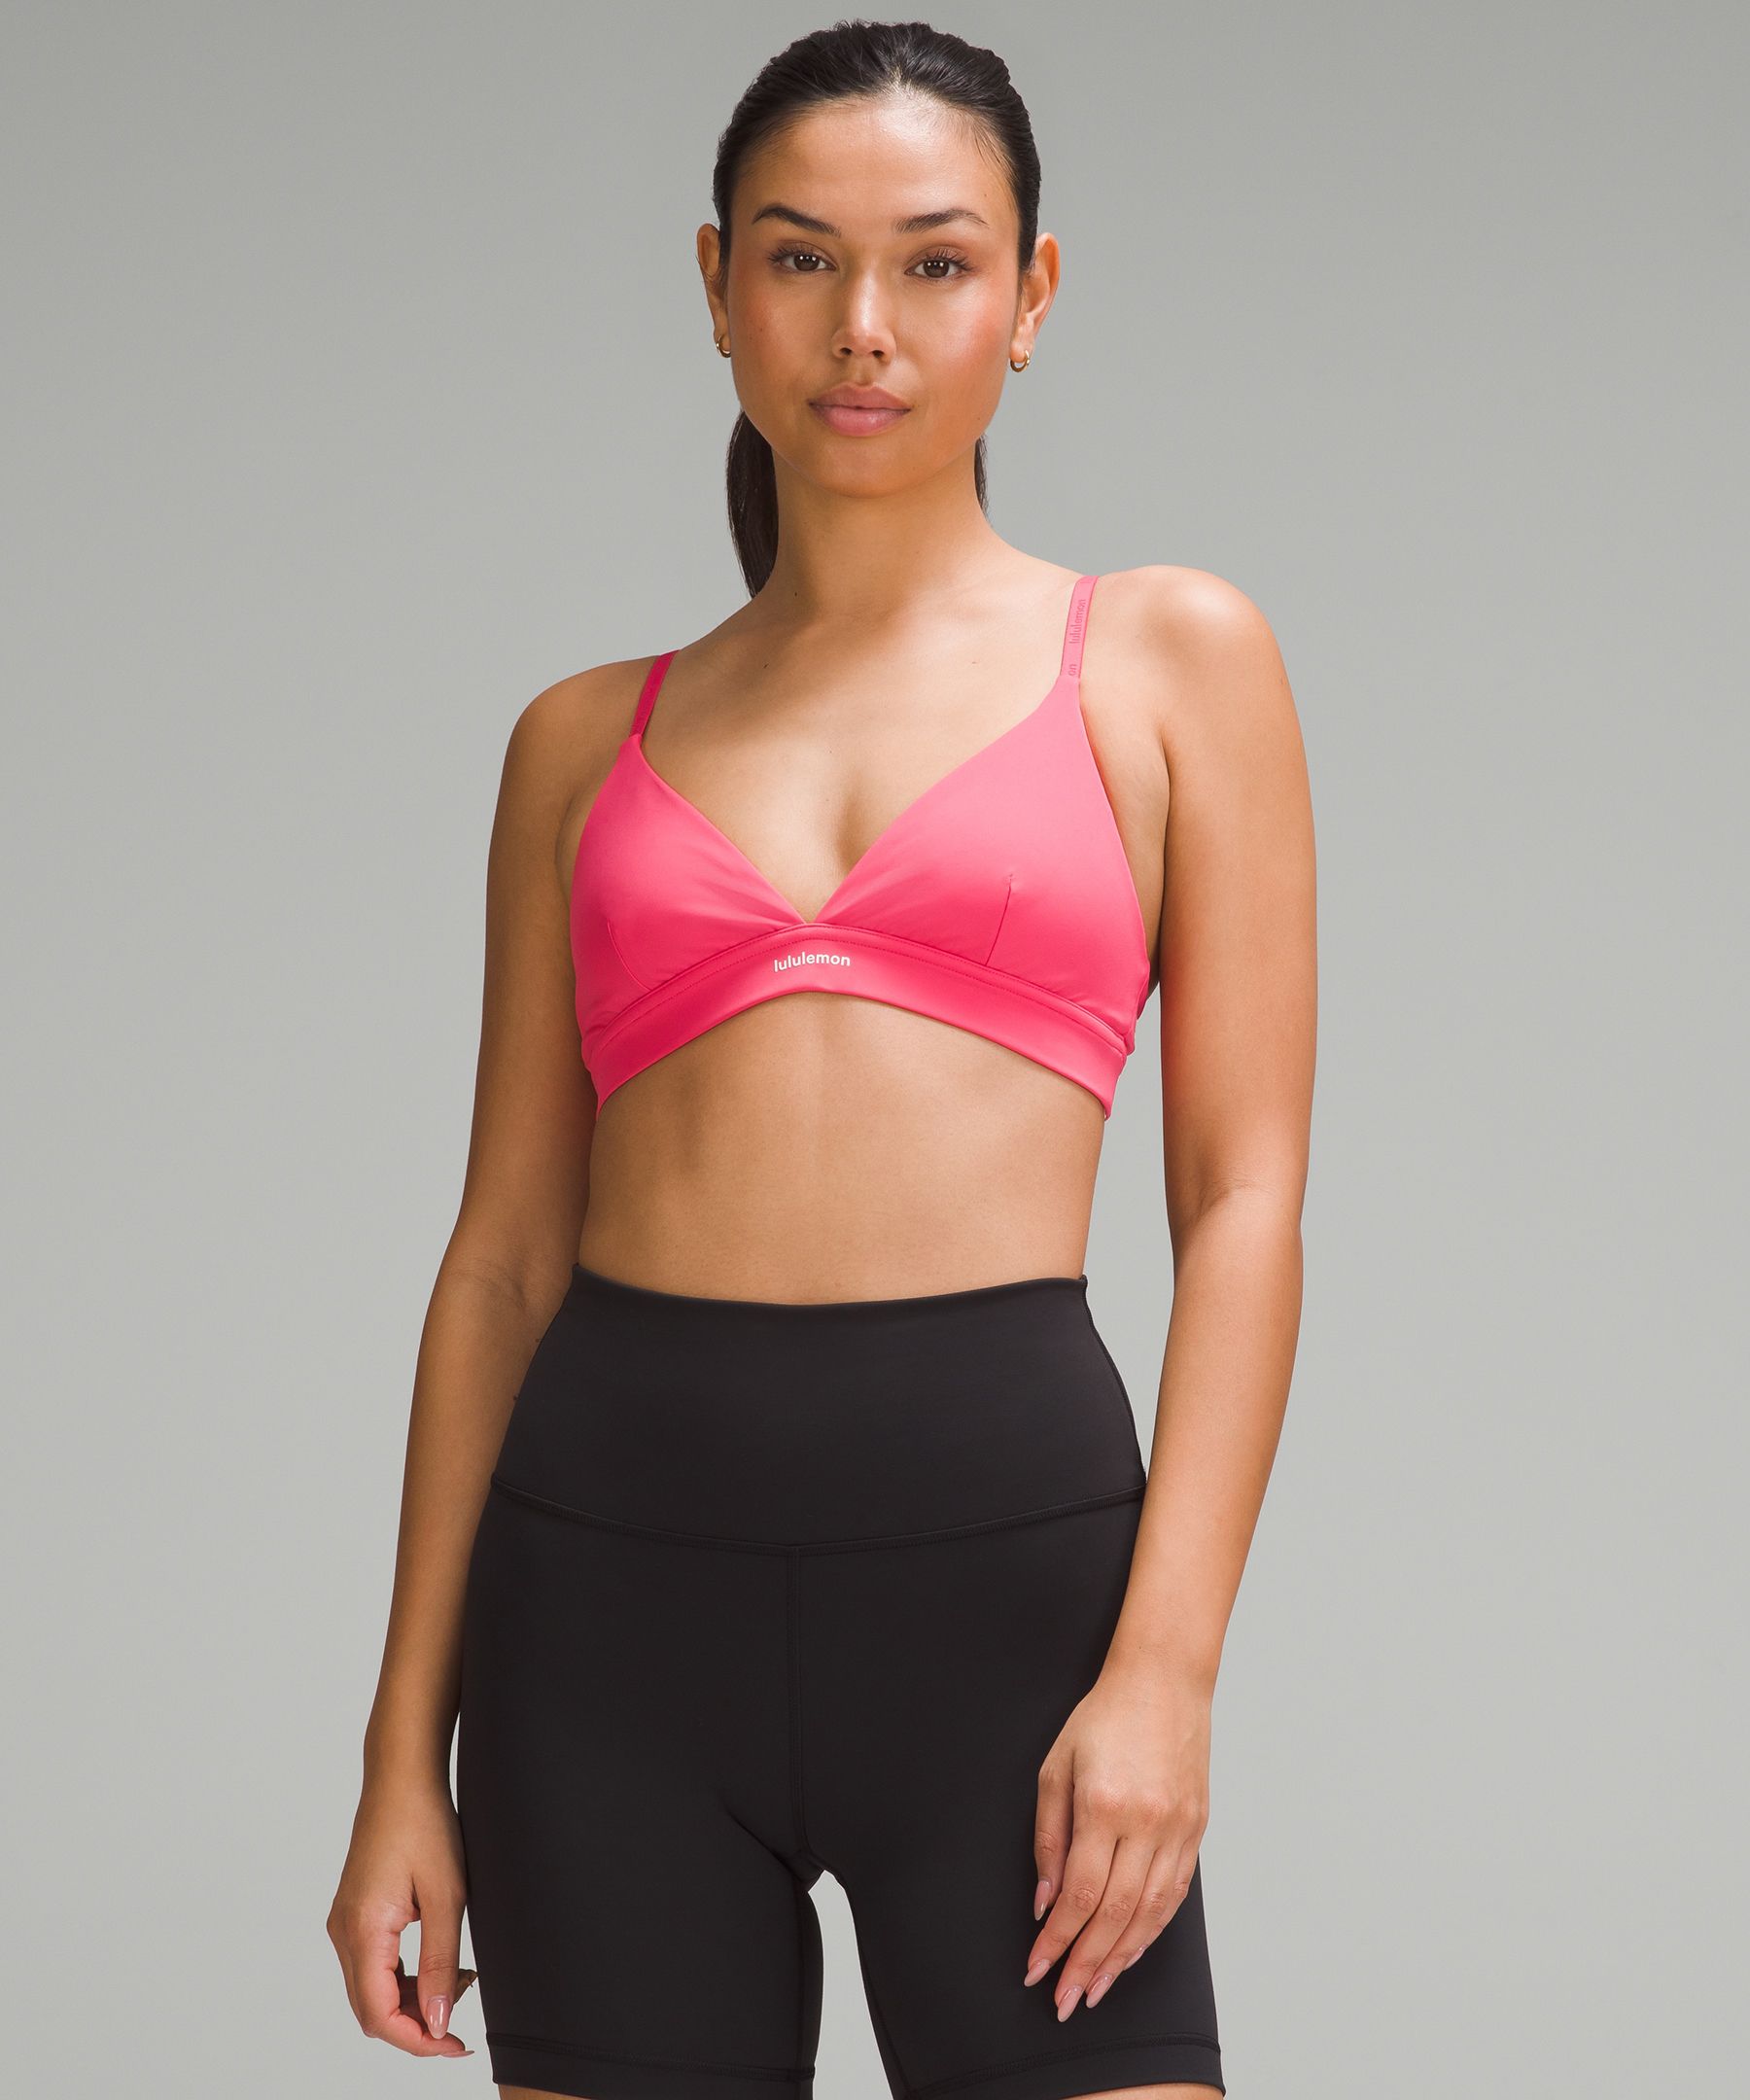 Lululemon NWOT Hold True Bra 36B Size undefined - $61 - From Zoes